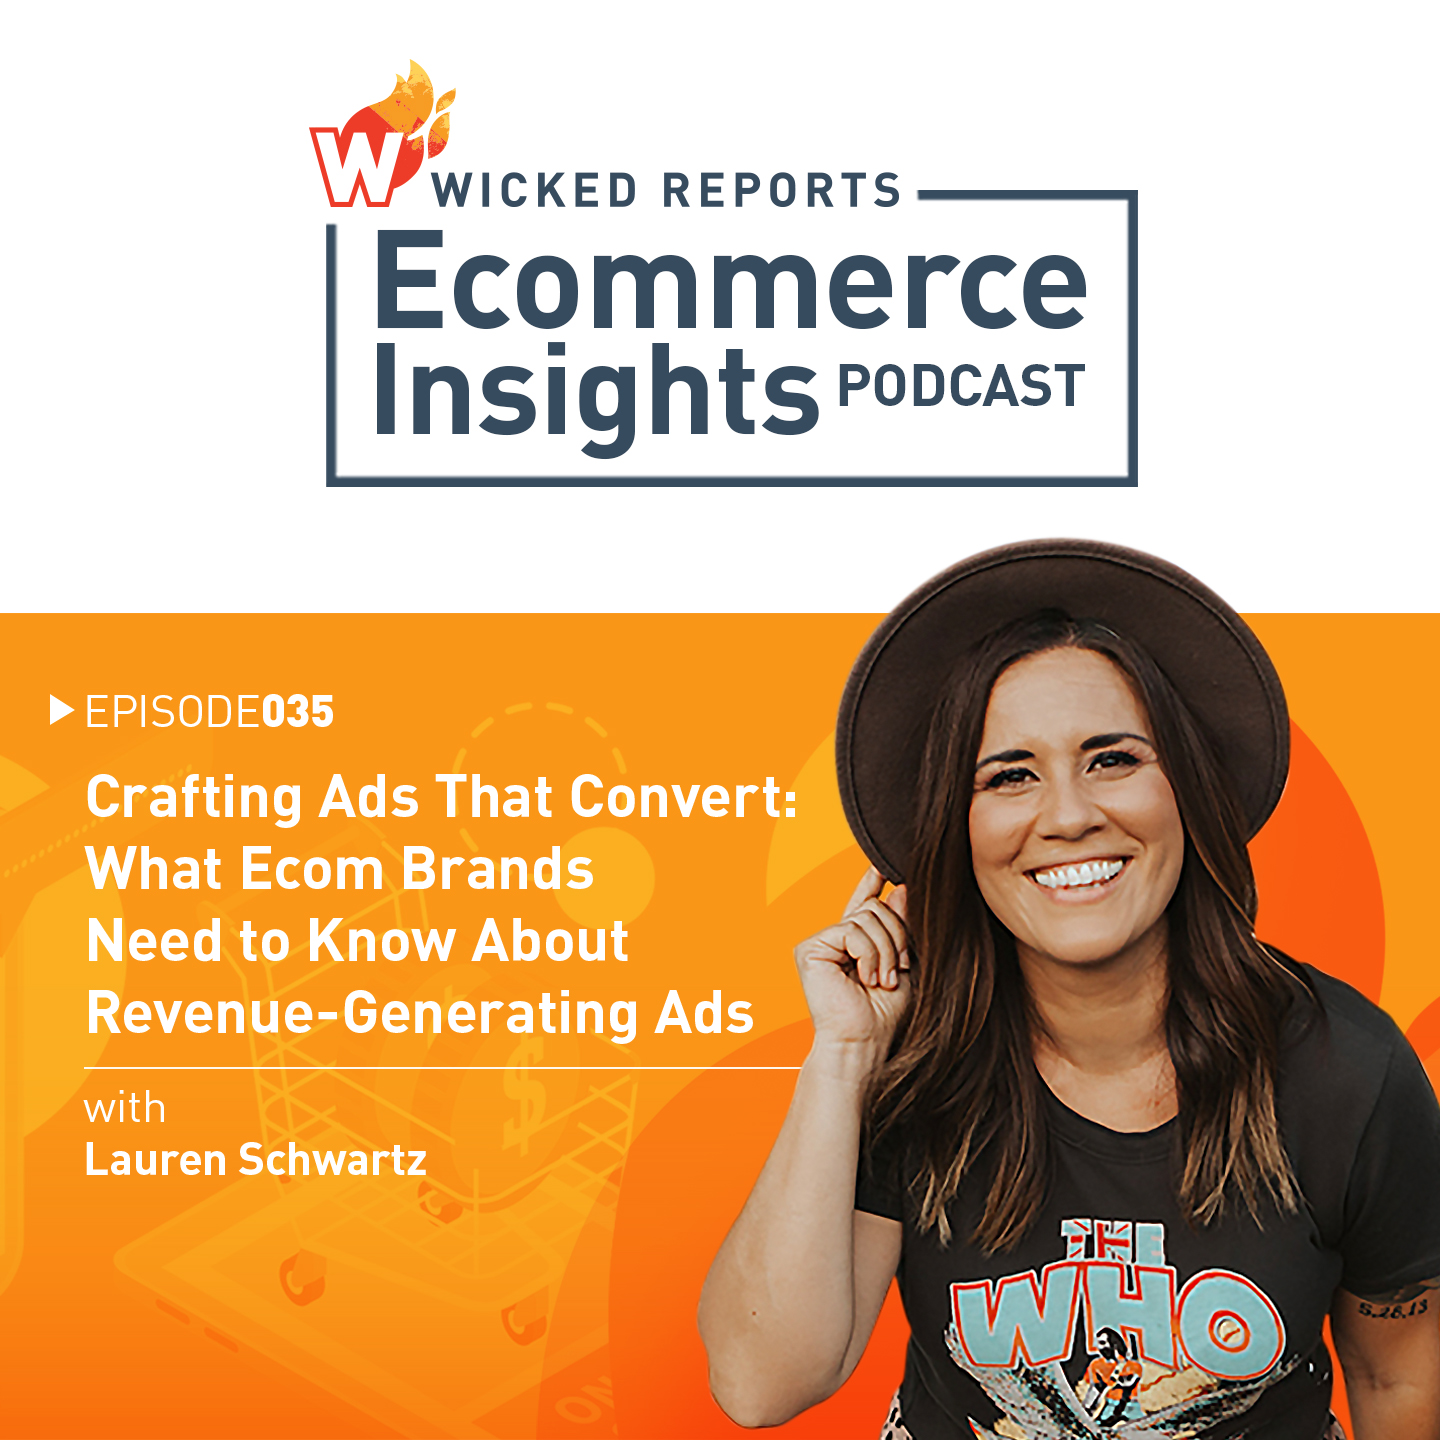 Crafting Ads That Convert: What Ecom Brands Need To Know About Revenue-Generating Ads